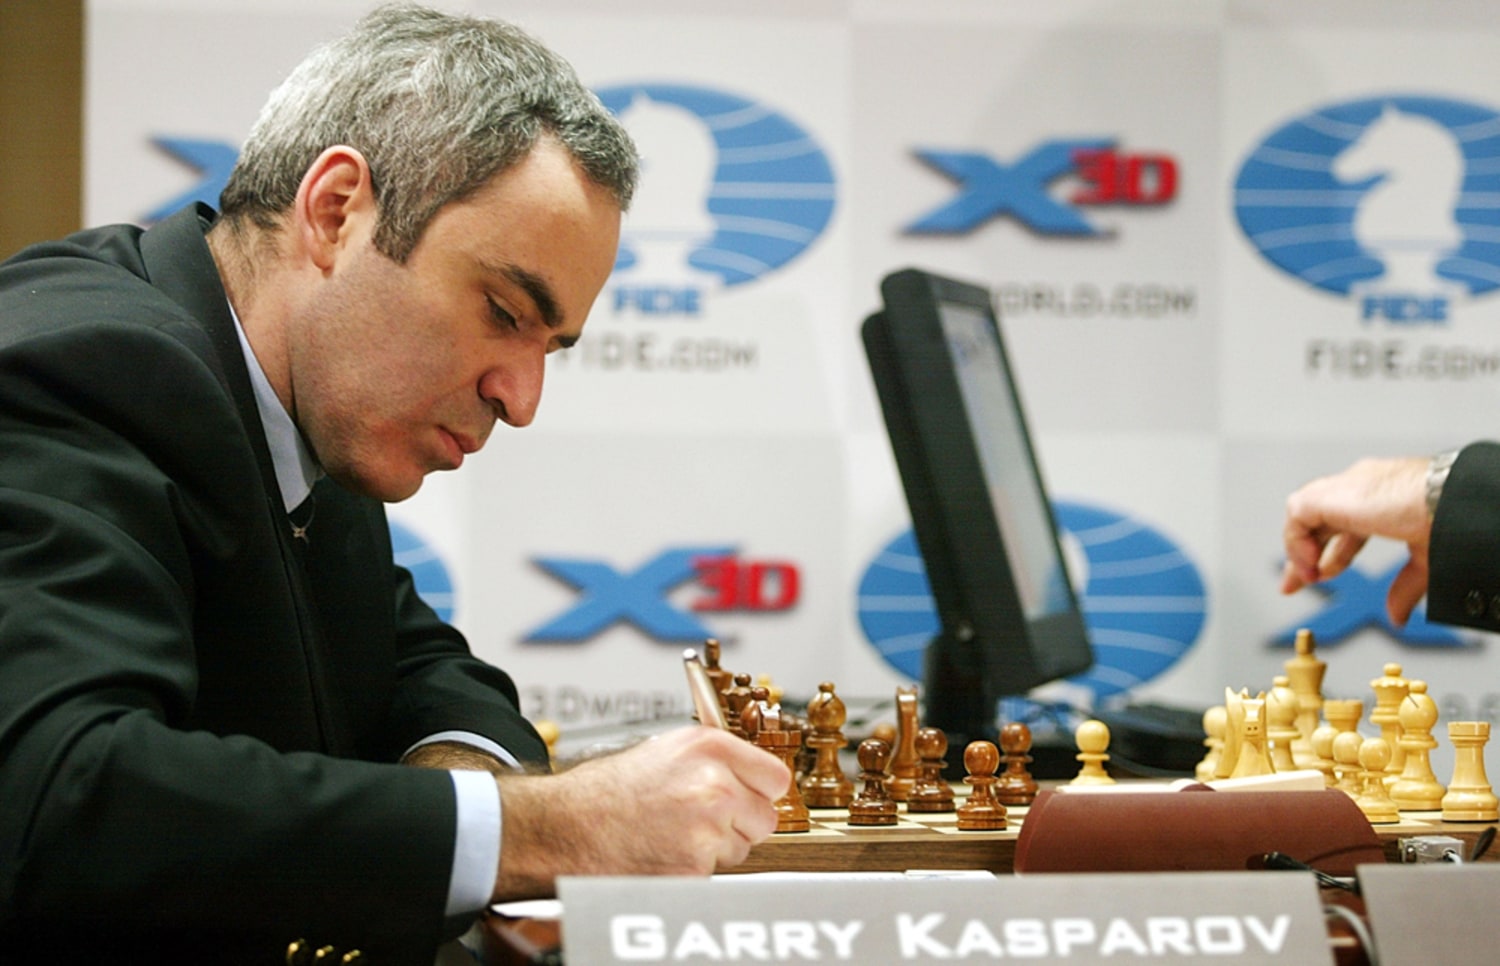 Garry Kasparov net worth in numbers. How rich is the ex-chess champion?